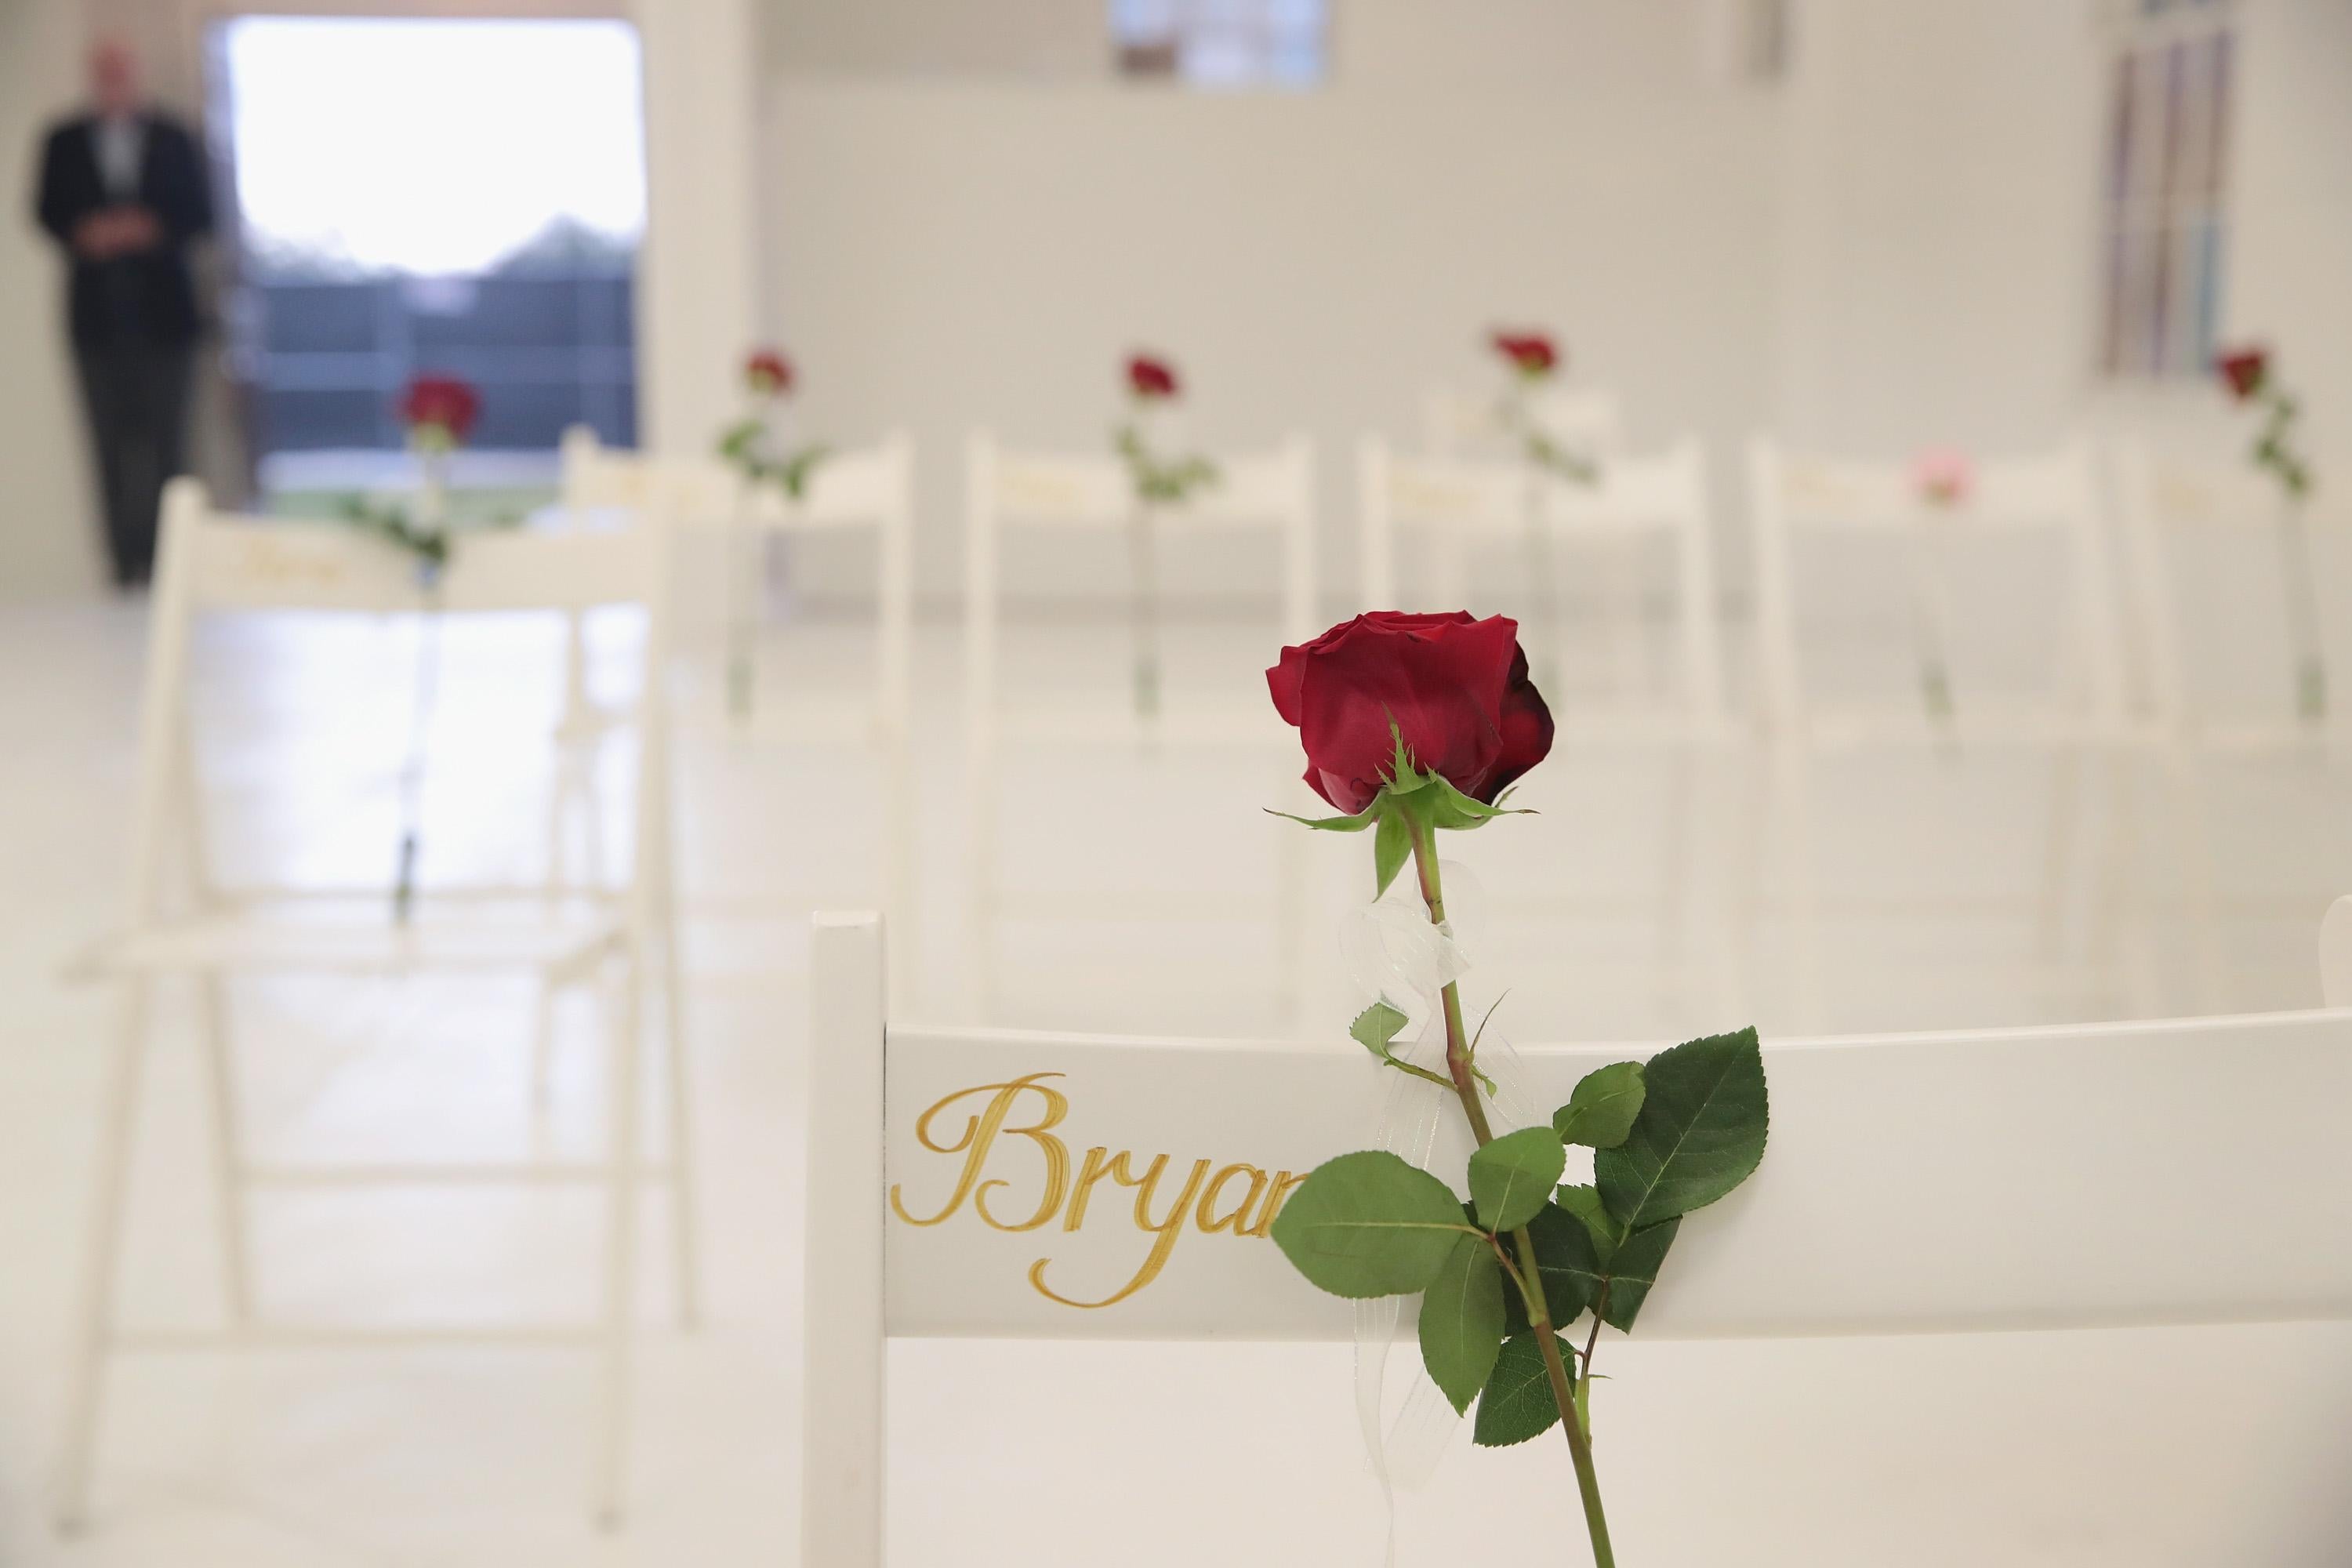 SUTHERLAND SPRINGS, TX - NOVEMBER 12:  The First Baptist Church of Sutherland Springs is turned into a memorial to honor those who died on November 12, 2017 in Sutherland Springs, Texas. The inside of the church has been painted white with 26 white chairs placed around the room. On each chair is a single rose and the name of a shooting victim. The chairs are placed throughout the room at the location where the victim died. The memorial will be open to the public. Devin Patrick Kelley shot and killed the 26 people and wounded 20 others when he opened fire during Sunday service at the church on November 5th.  (Photo by Scott Olson/Getty Images)